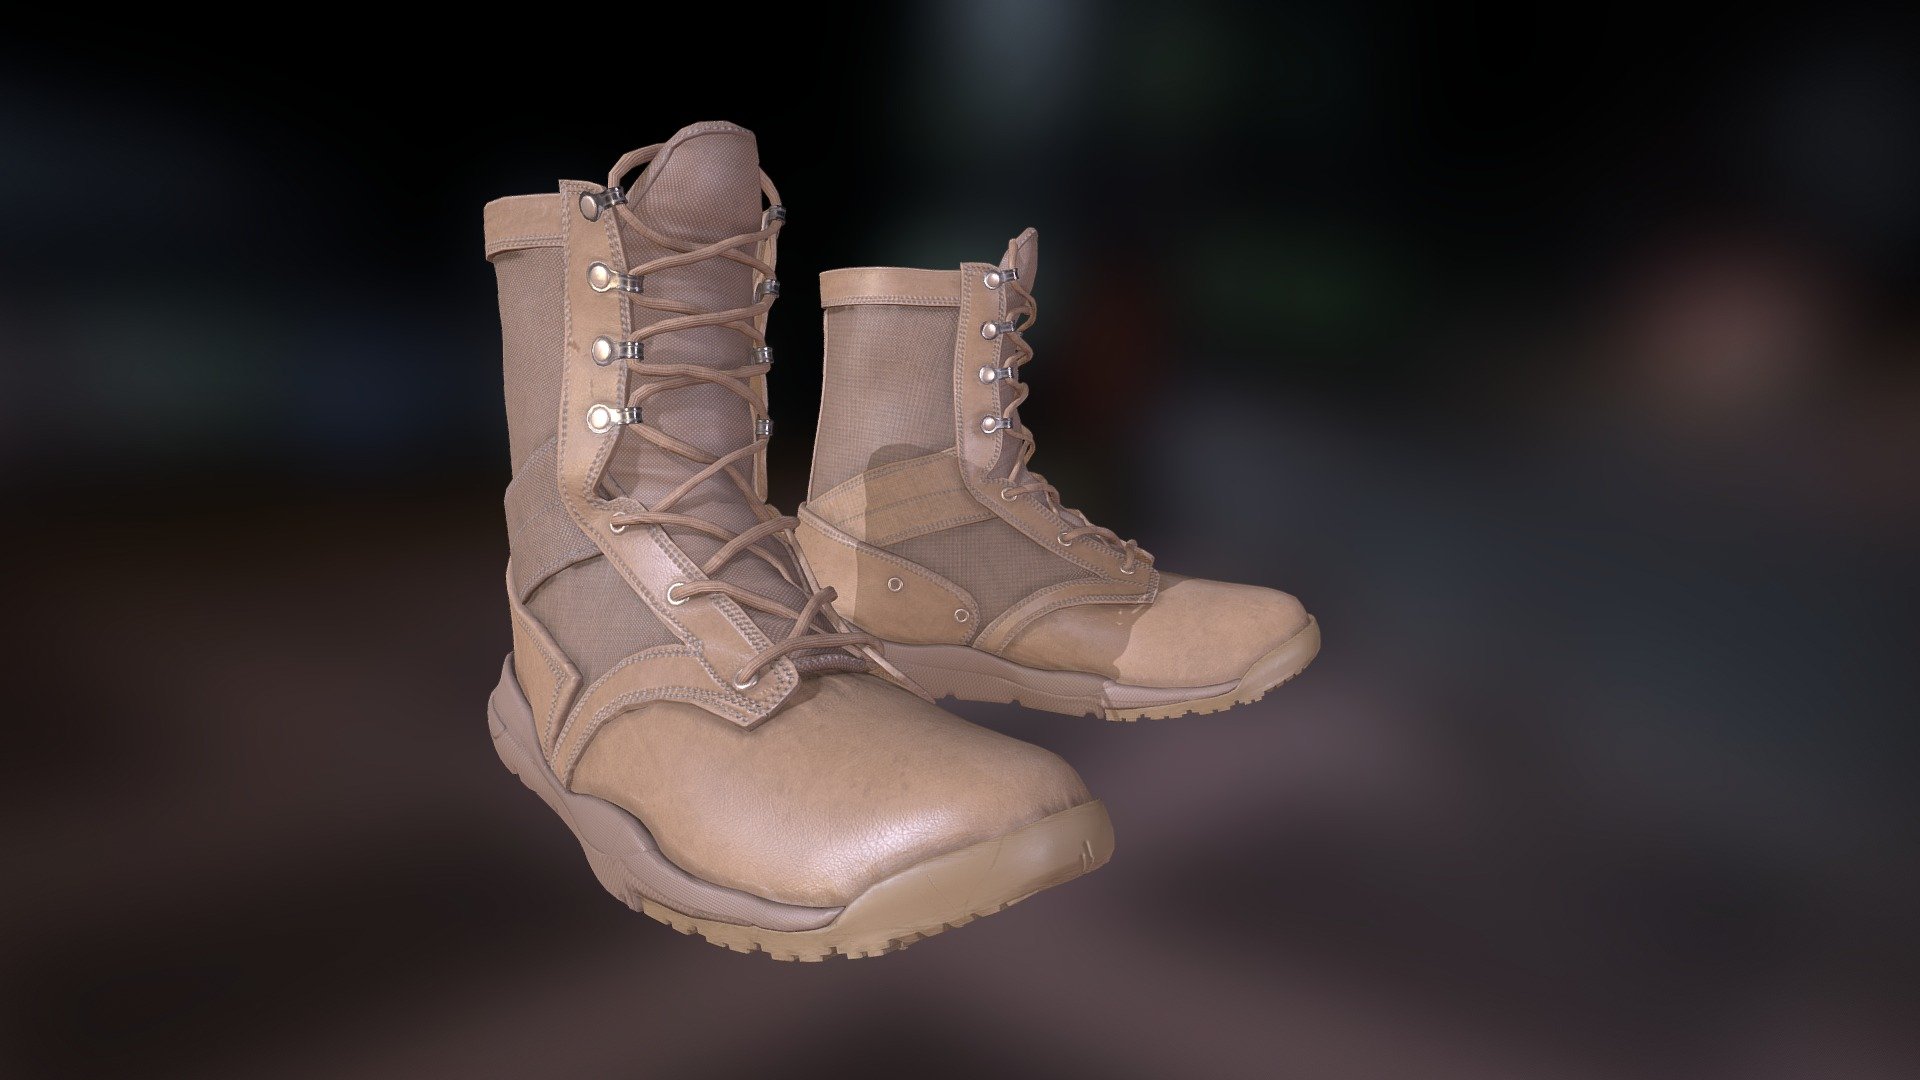 Tactical Boots asset made in 2020. Was also a great study creating the military's  gear. and to learn more substance painter. which made me use patterns and Grunges alongside ZBrush bakes. was such a fun process in

Hope you like it guys ! Stay tuned for more millitary Grade Equipment (Props) 3d model